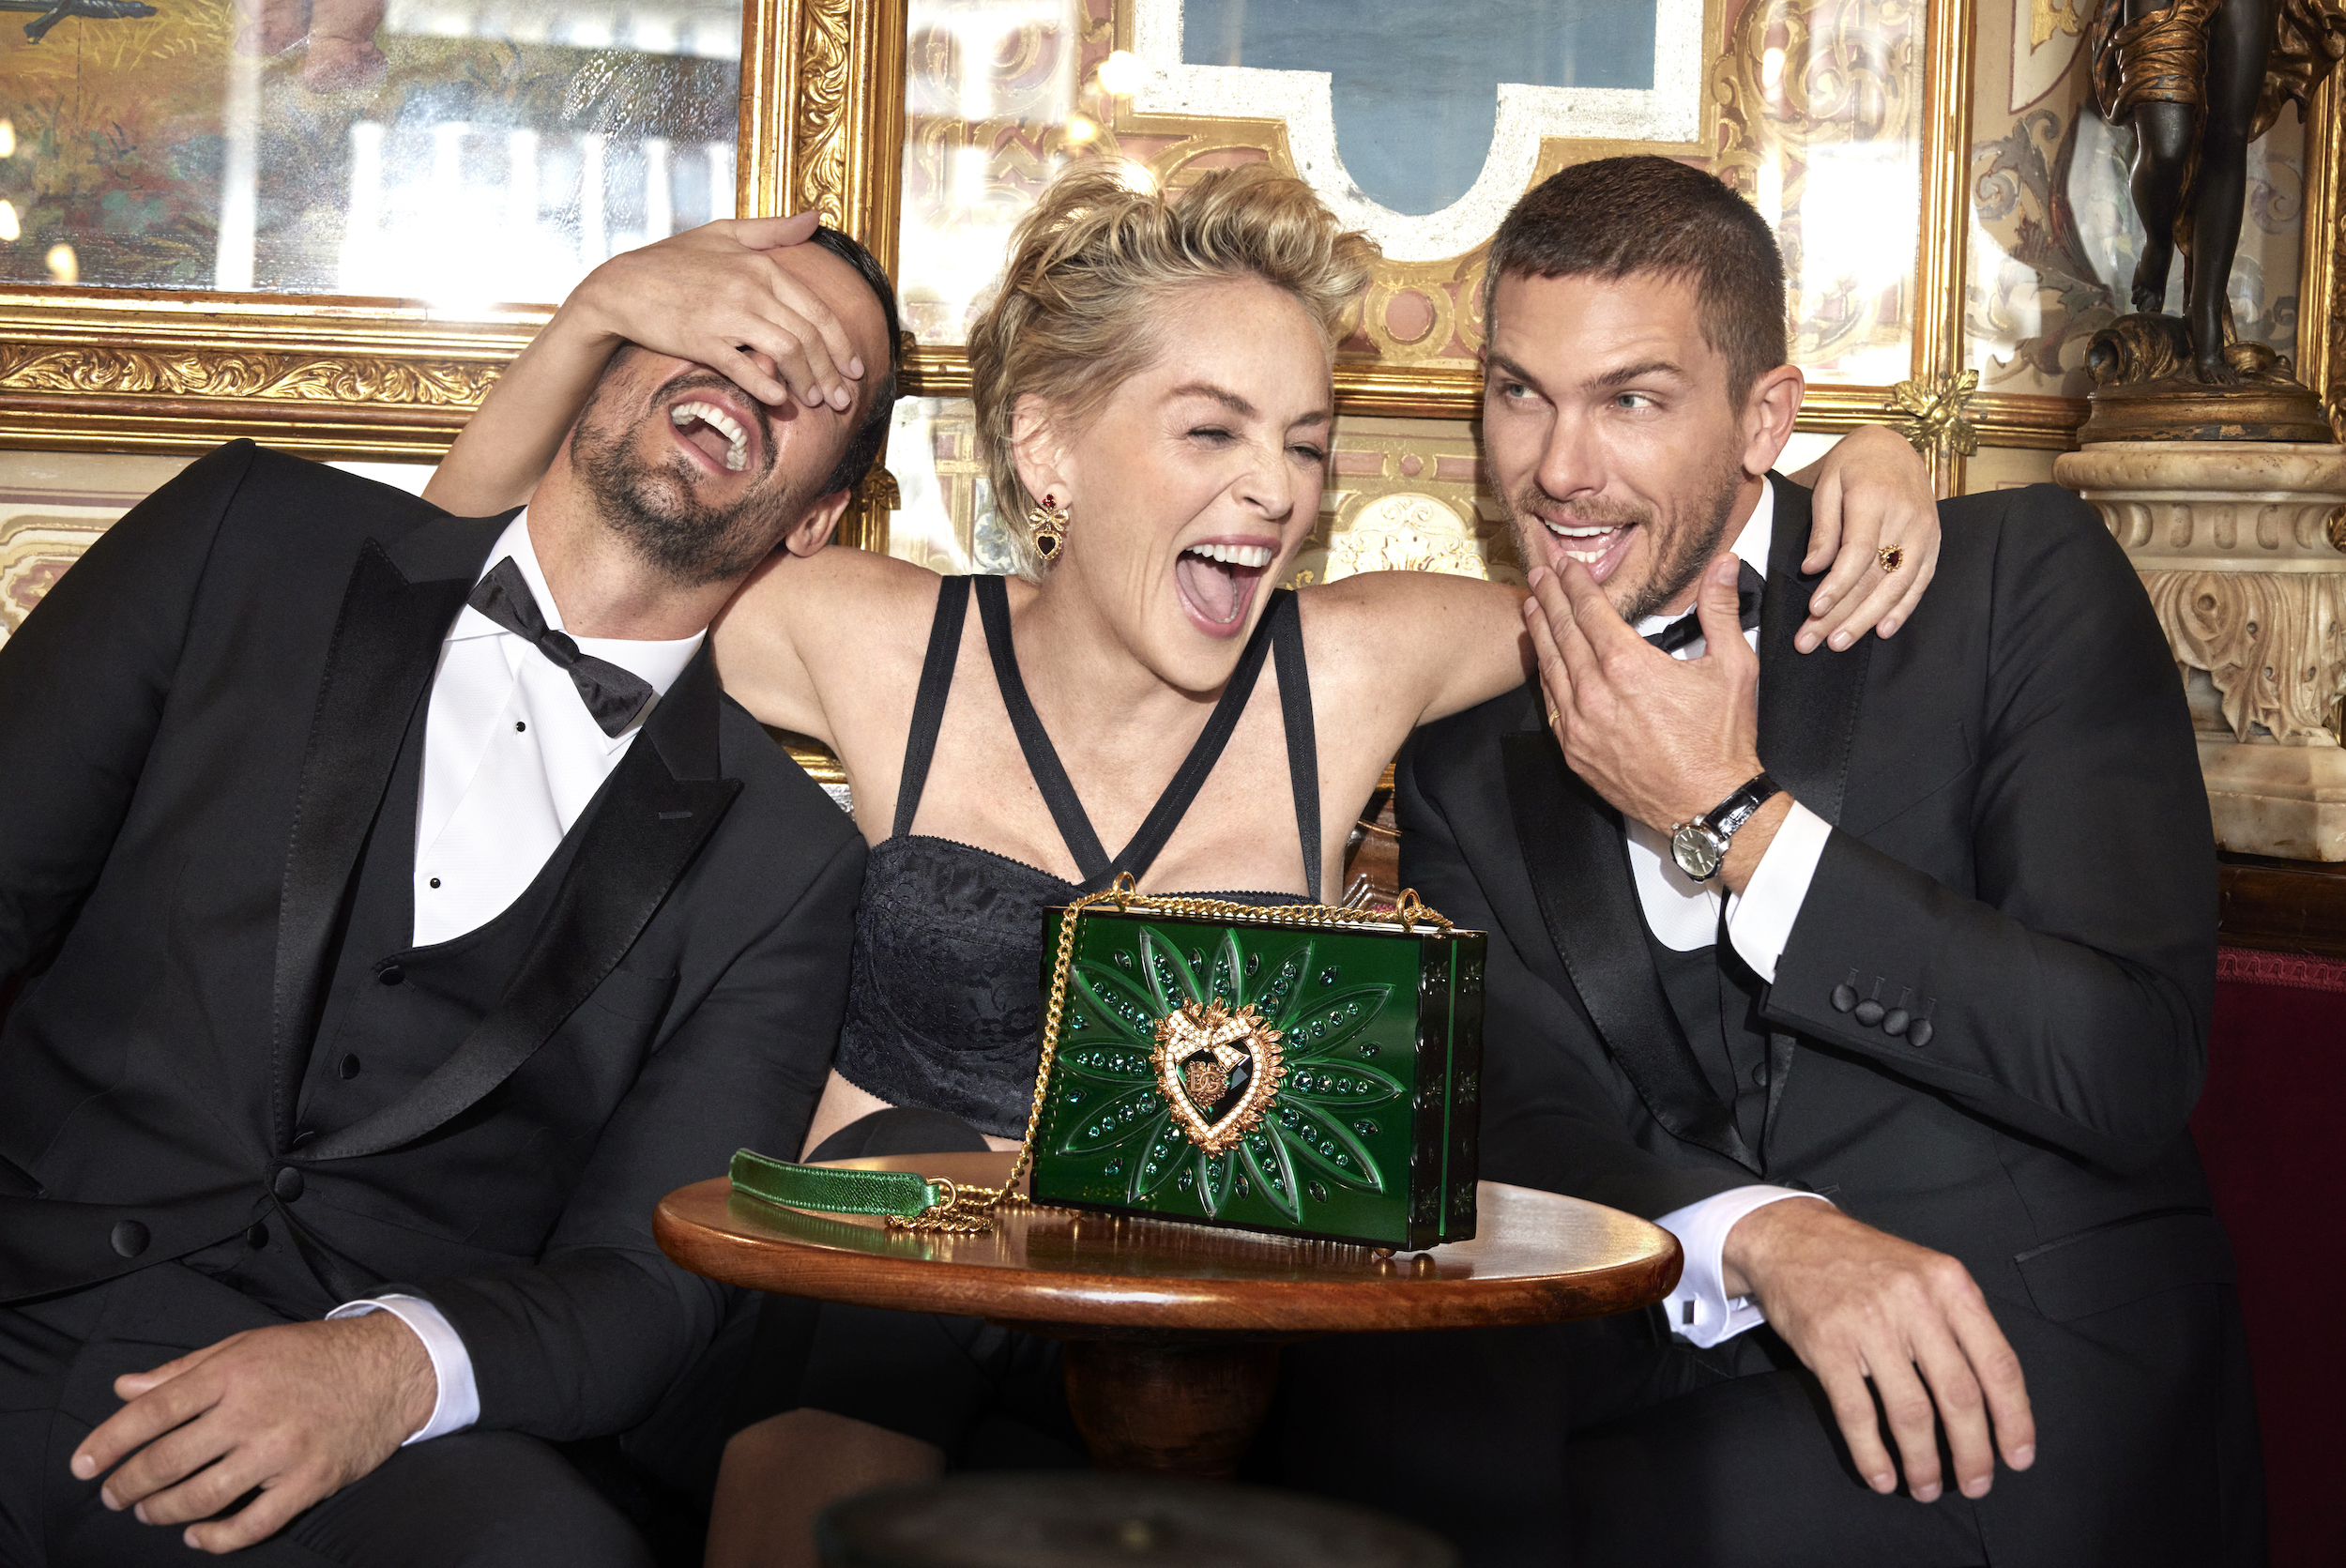 SHARON STONE IS THE NEW FACE OF THE SS 2022 DEVOTION BAG ADV CAMPAIGN OF DOLCE GABBANA.